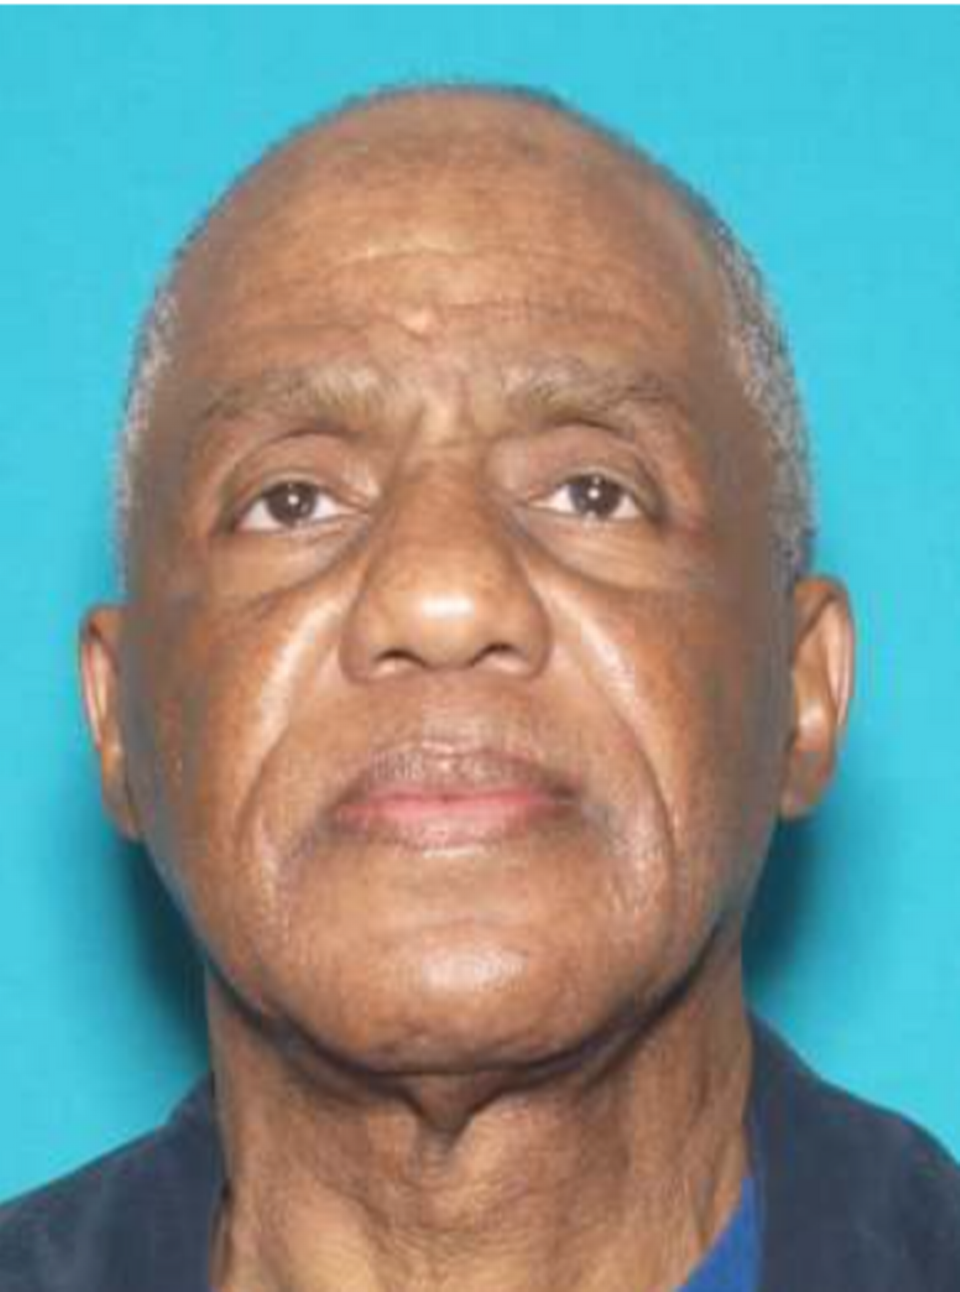 Maurice Robinson, 72, left his residence Sunday afternoon.